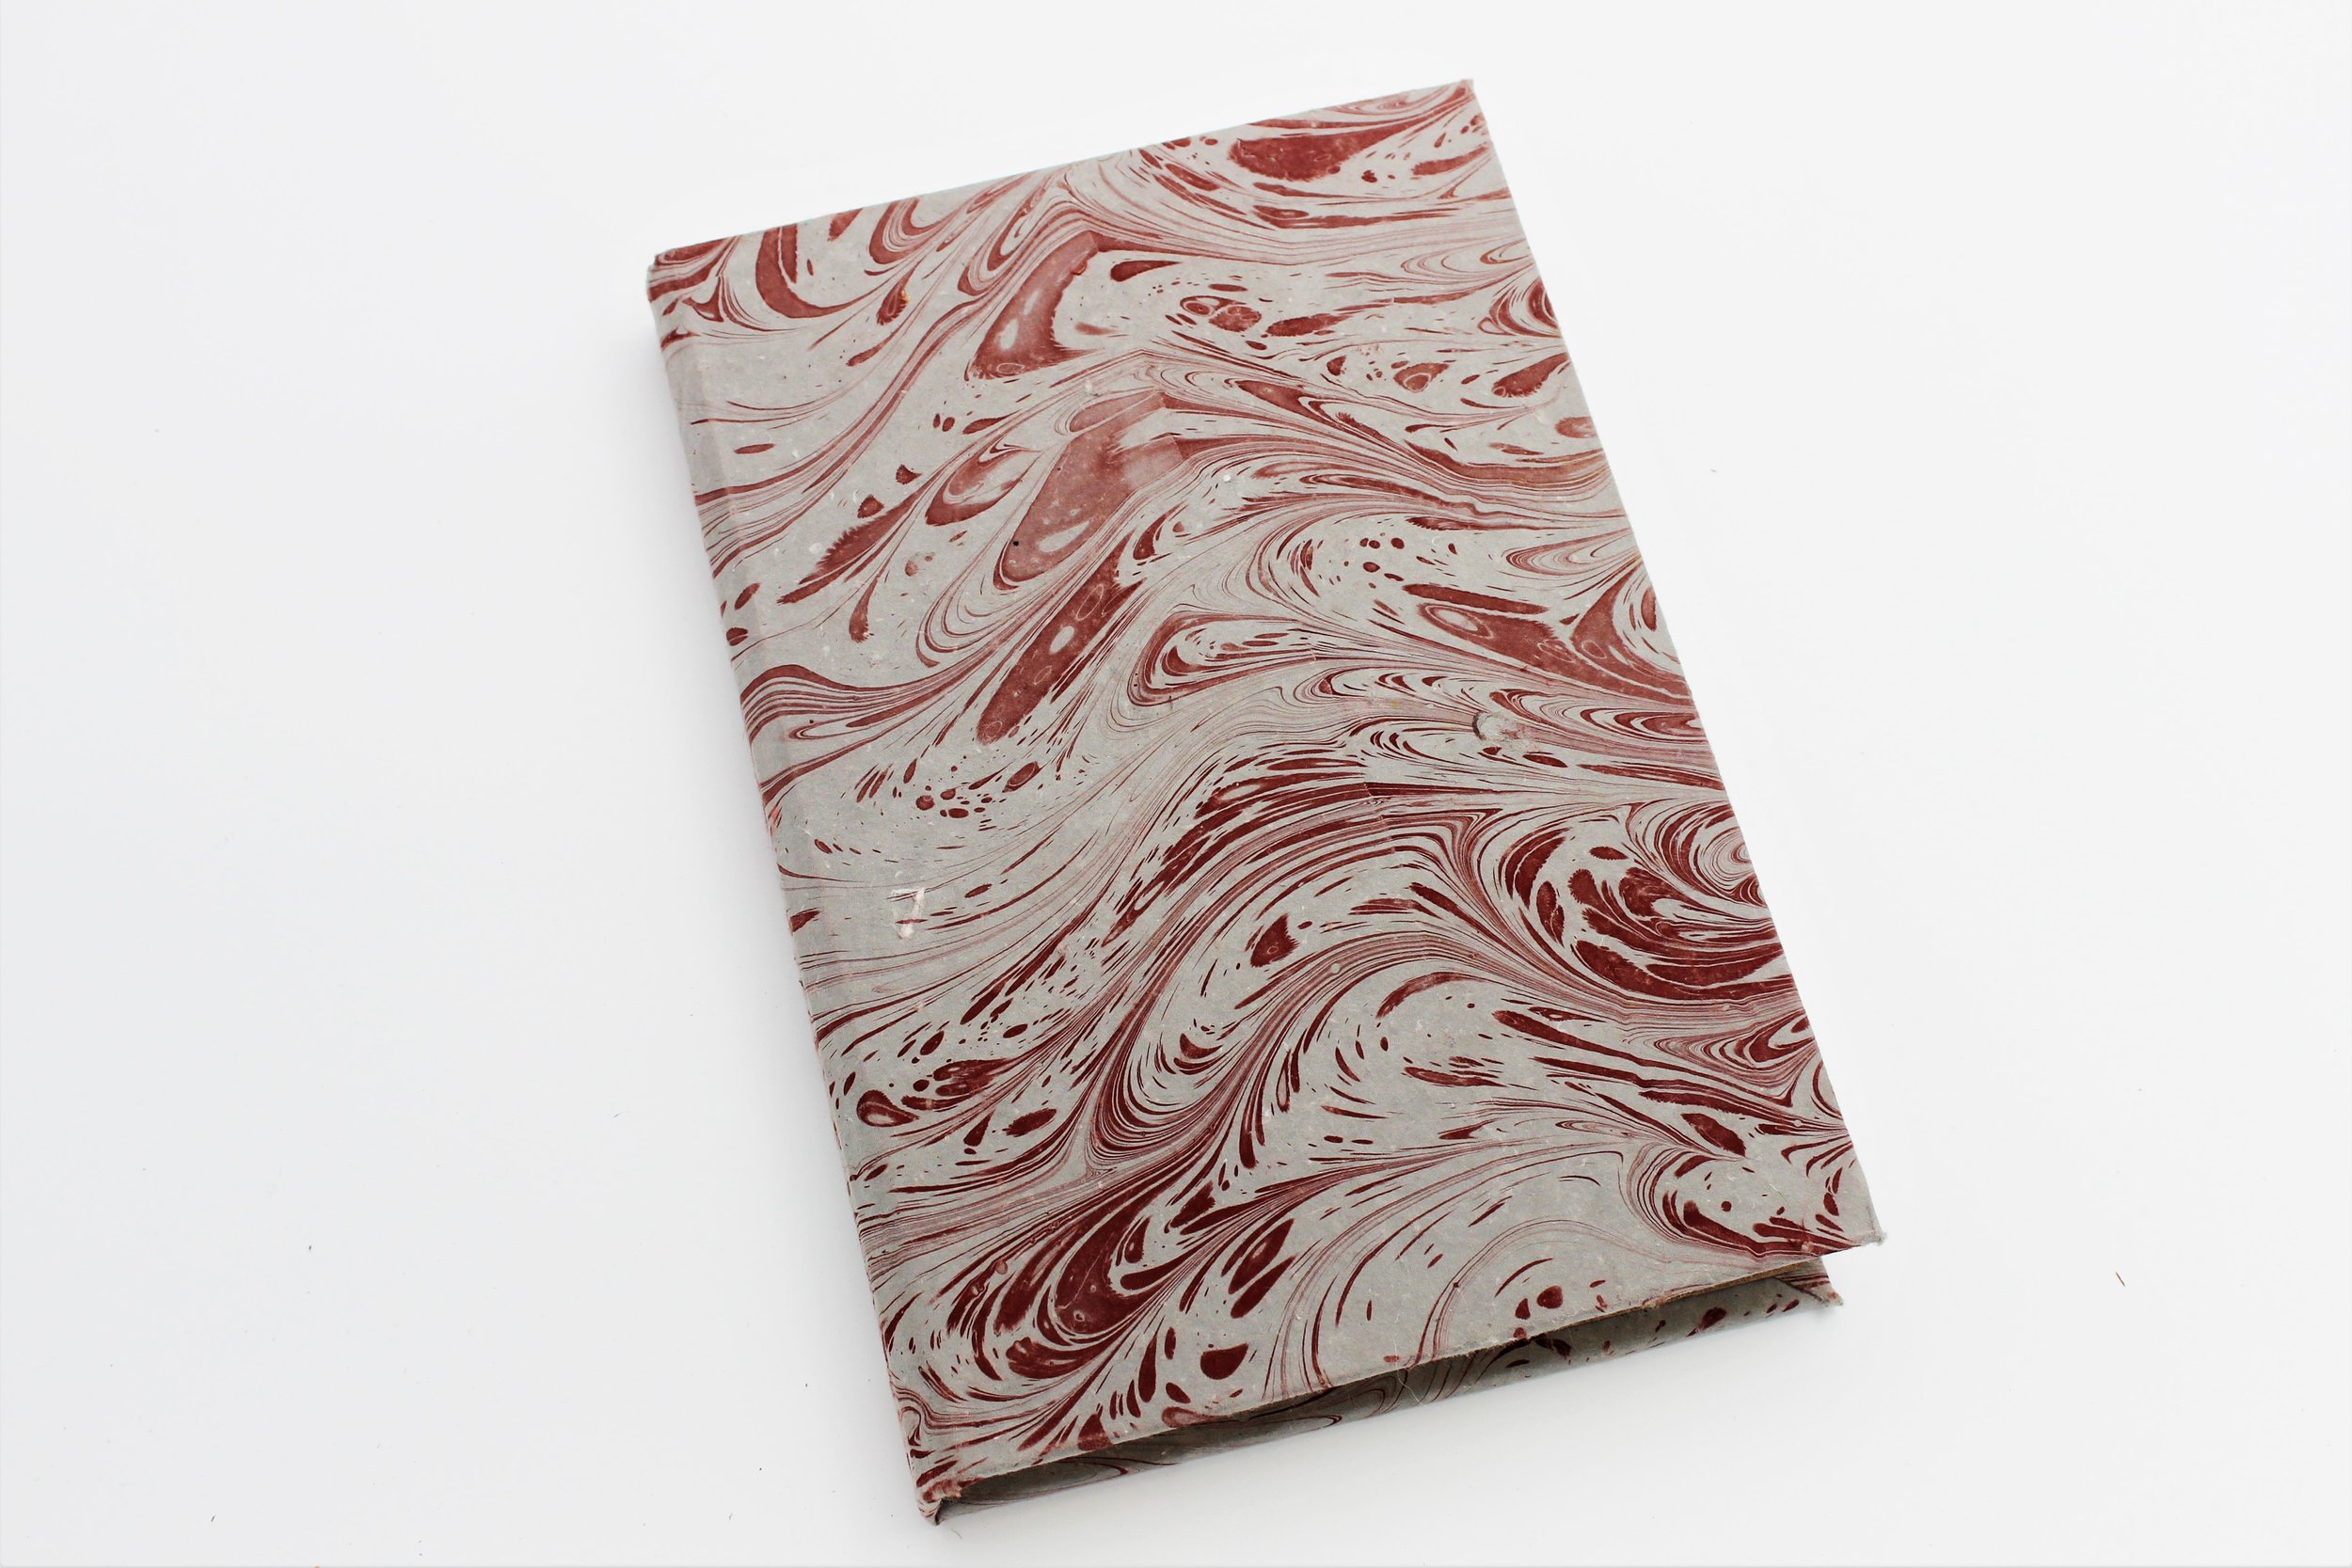 Papermaking & Paper Marbling - Minnesota Center for Book Arts